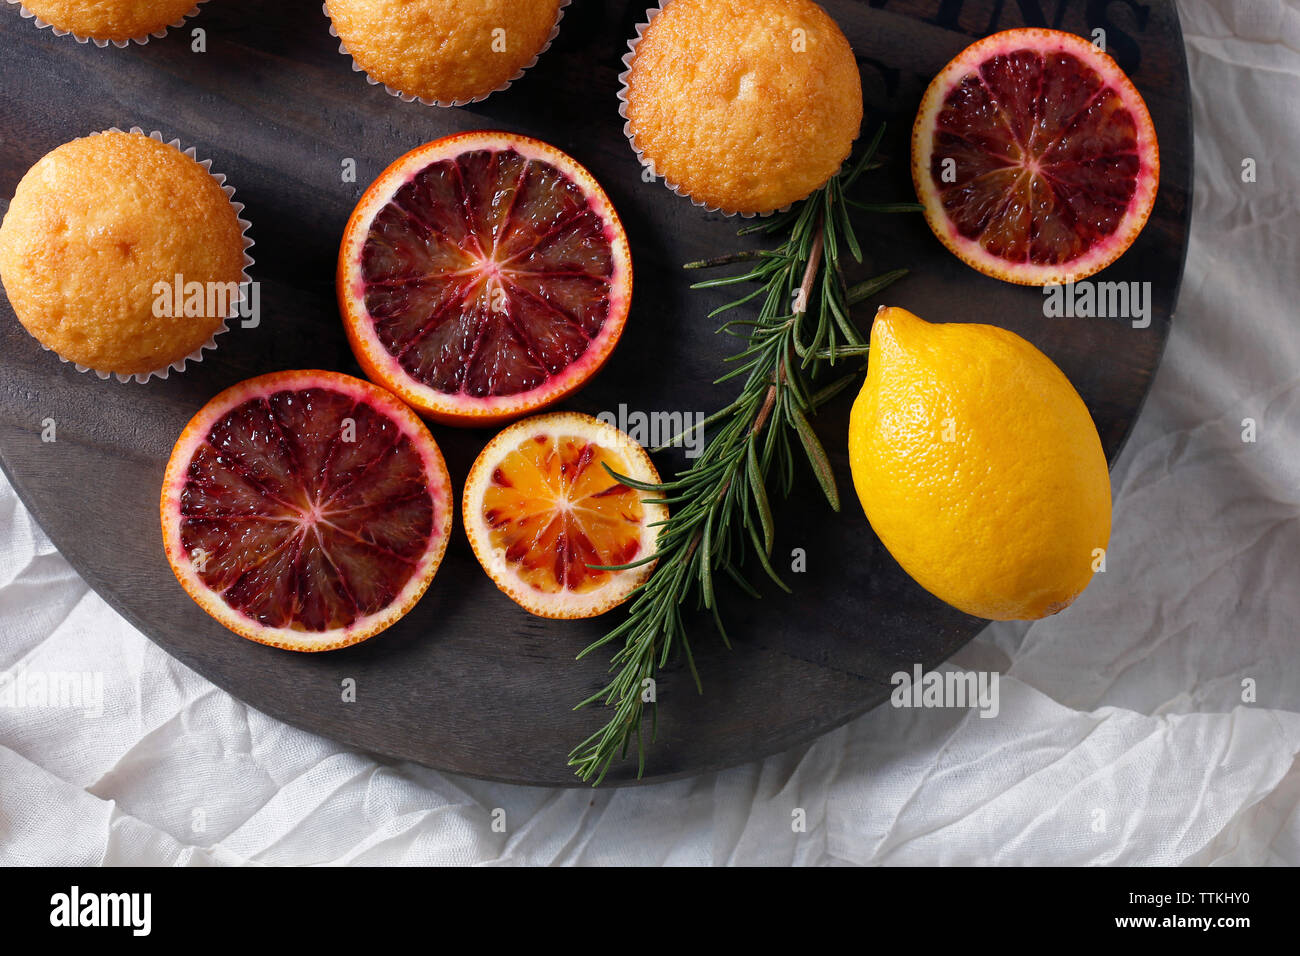 High angle view of fairy cakes with rosemary and citrus fruits on cutting board Stock Photo